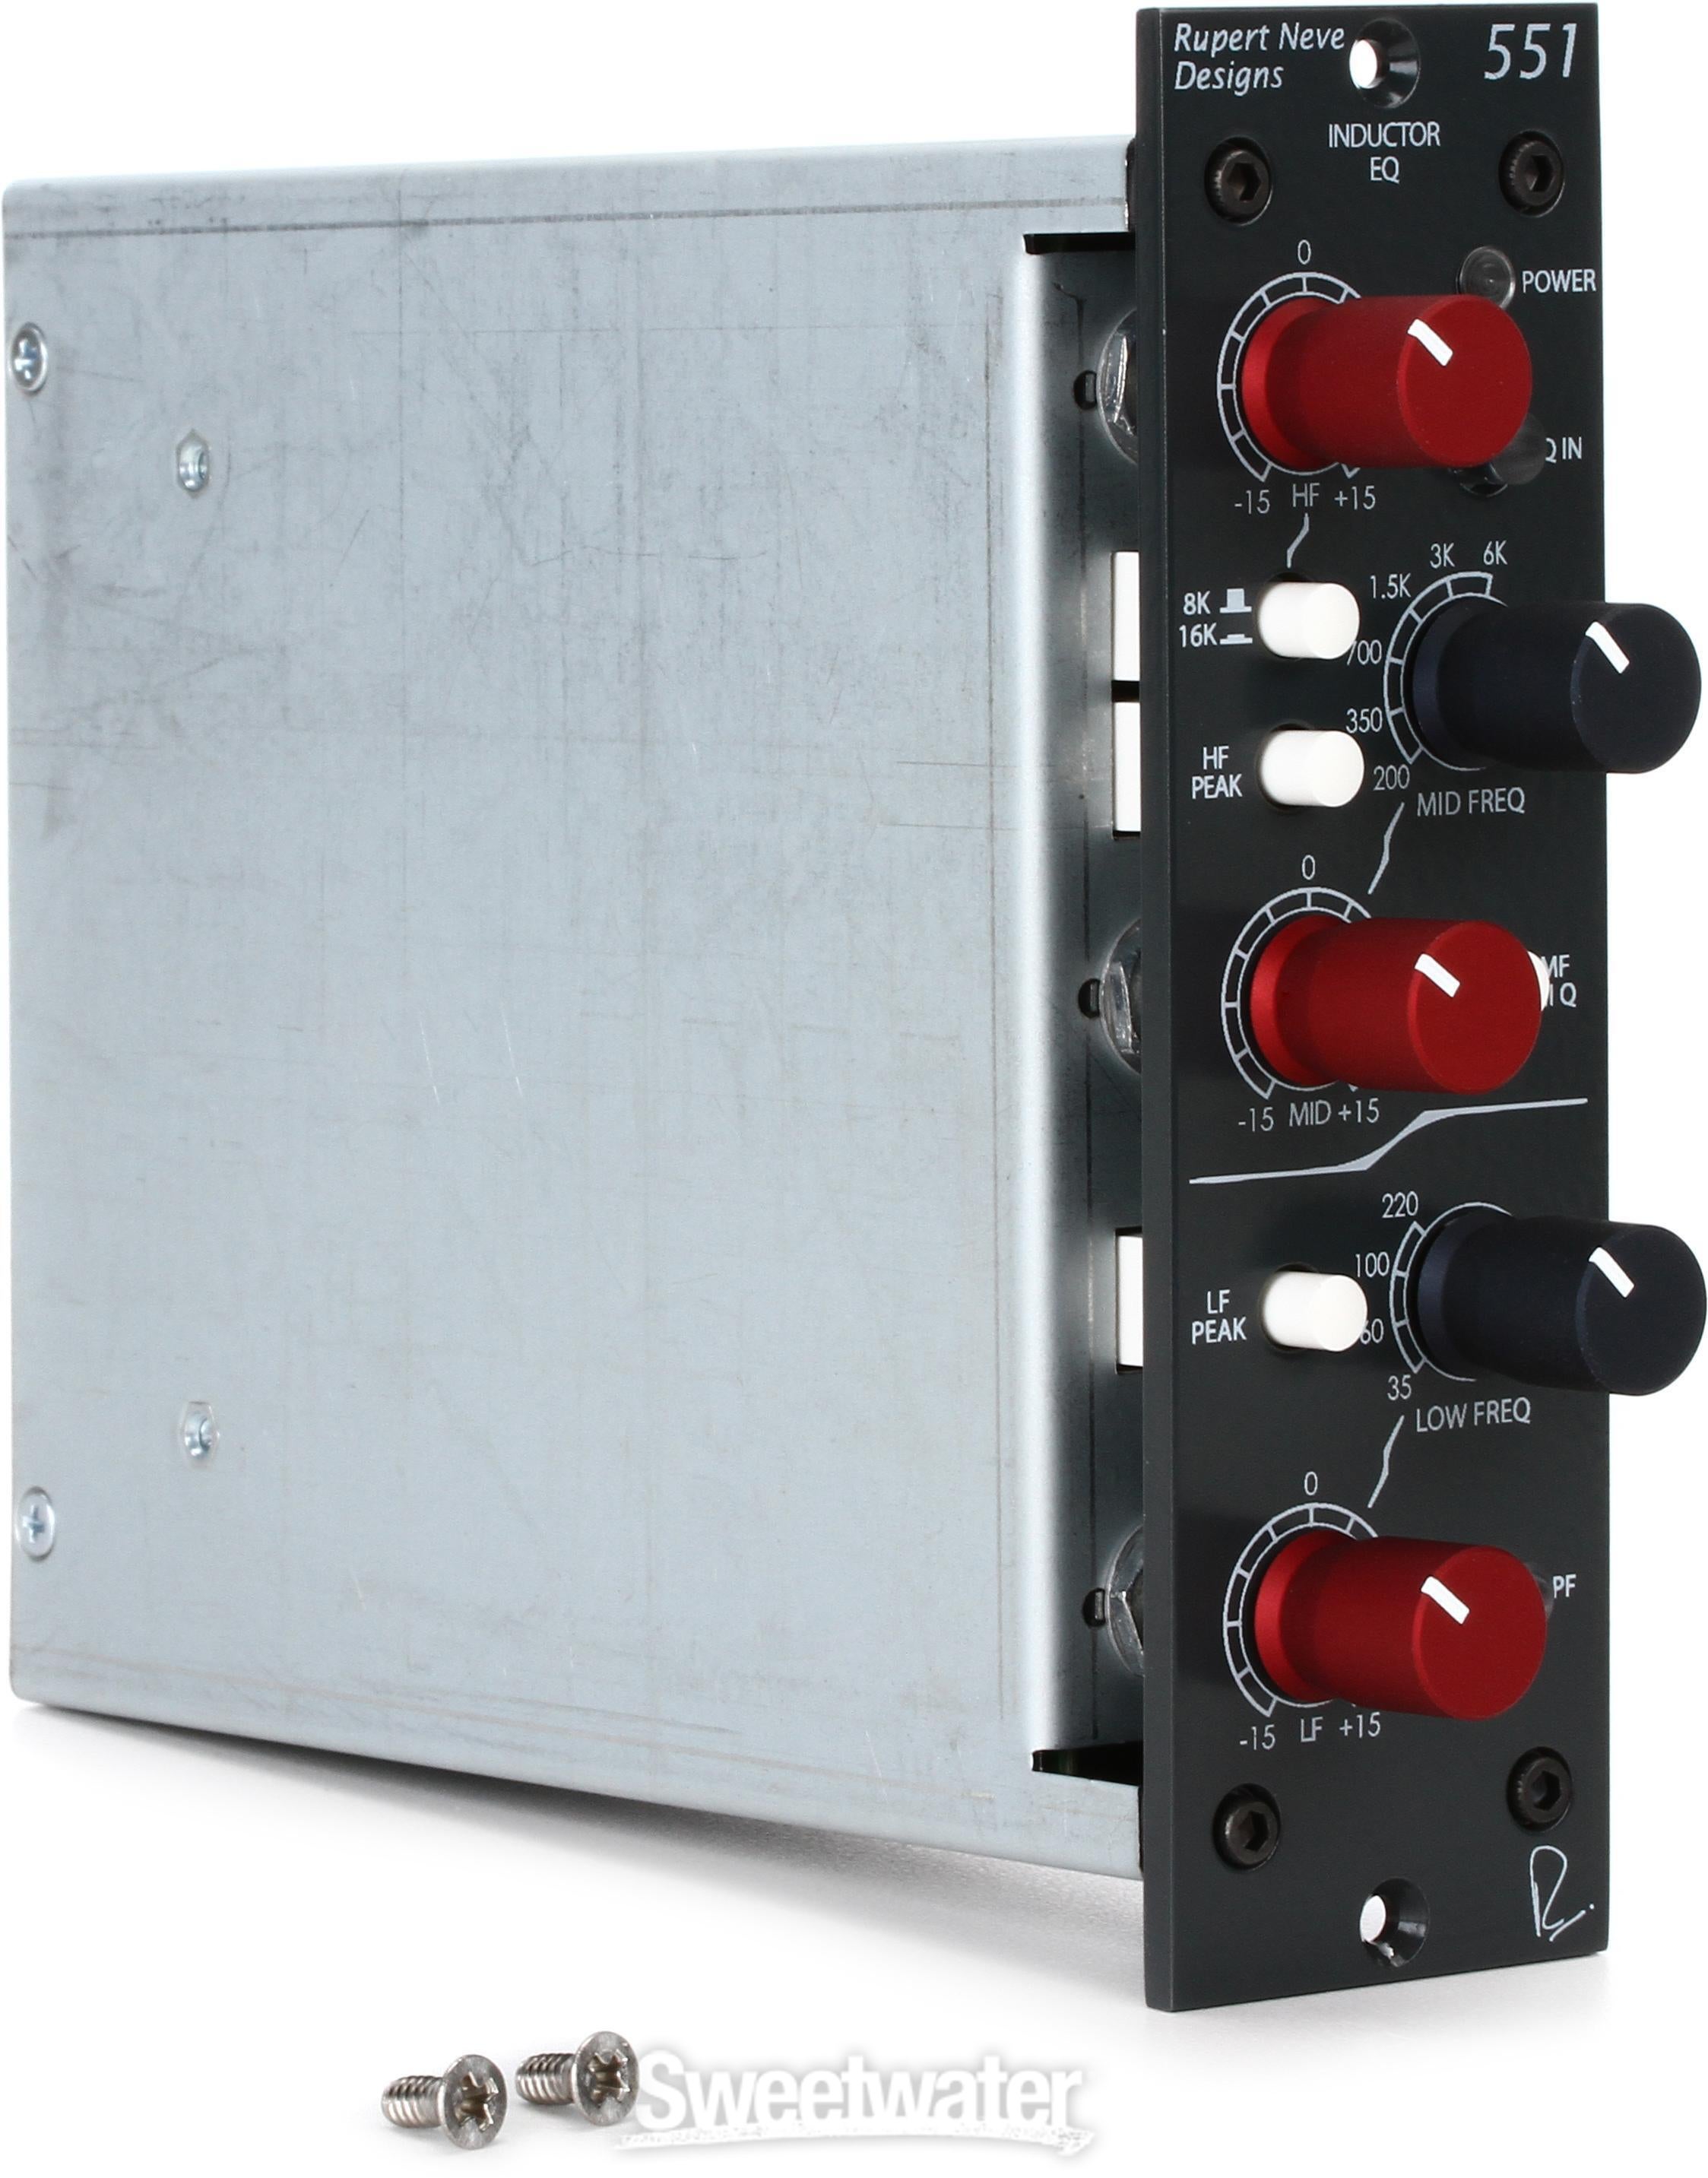 Rupert Neve Designs 551 500 Series Inductor Equalizer | Sweetwater